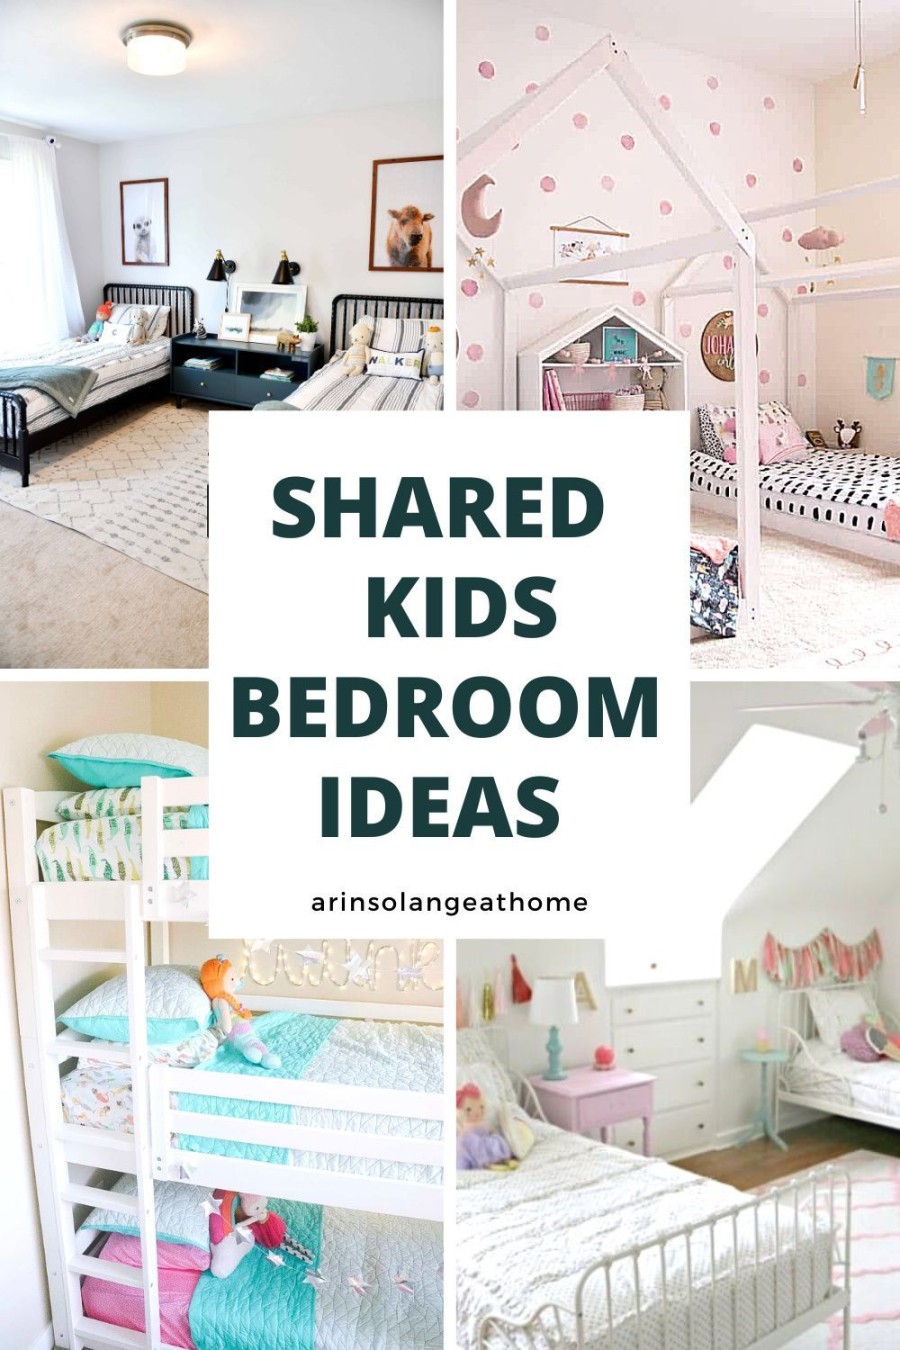 Advice on Siblings Sharing a Room - arinsolangeathome  Kids